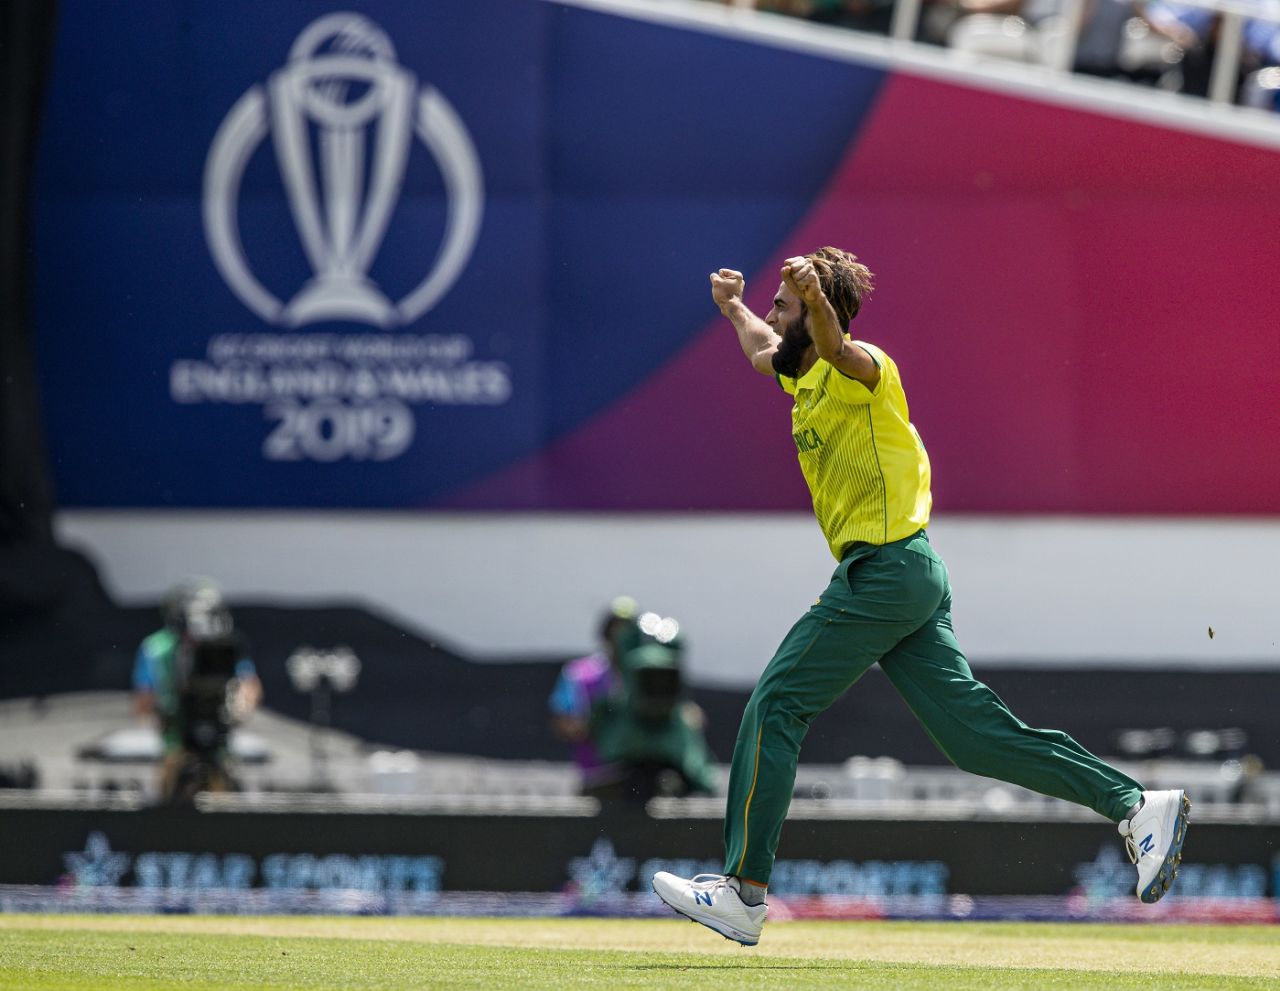 Imran Tahir celebrates after taking the wicket of Shakib Al Hasan, Bangladesh v South Africa, World Cup 2019, The Oval, June 2, 2019